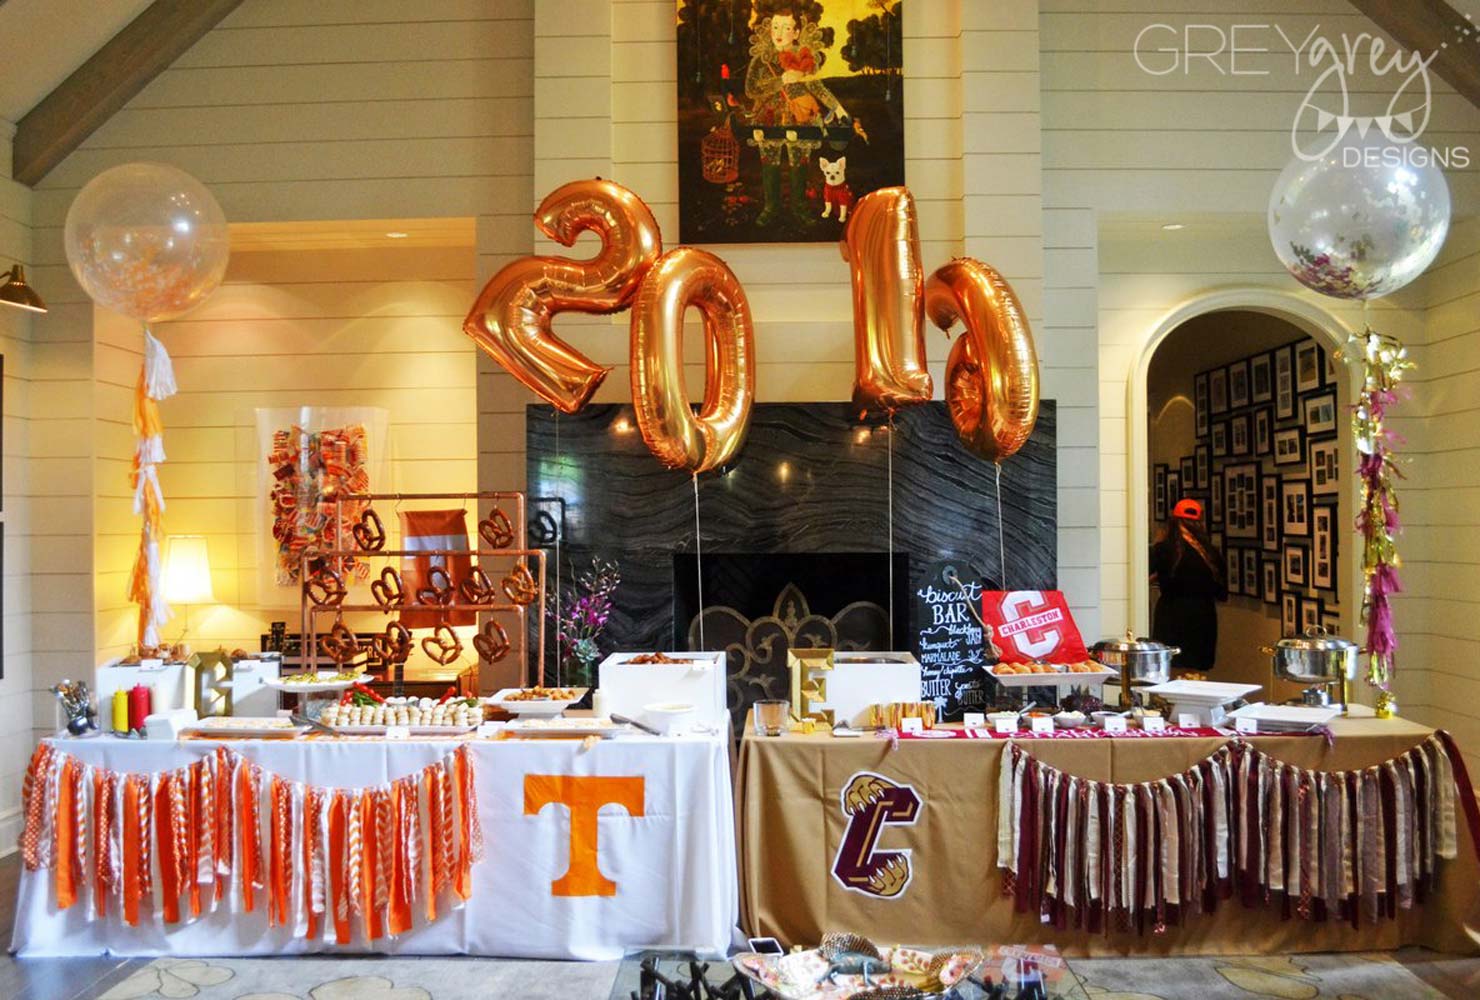 90+ Graduation Party Ideas for High School & College 2019 | Shutterfly